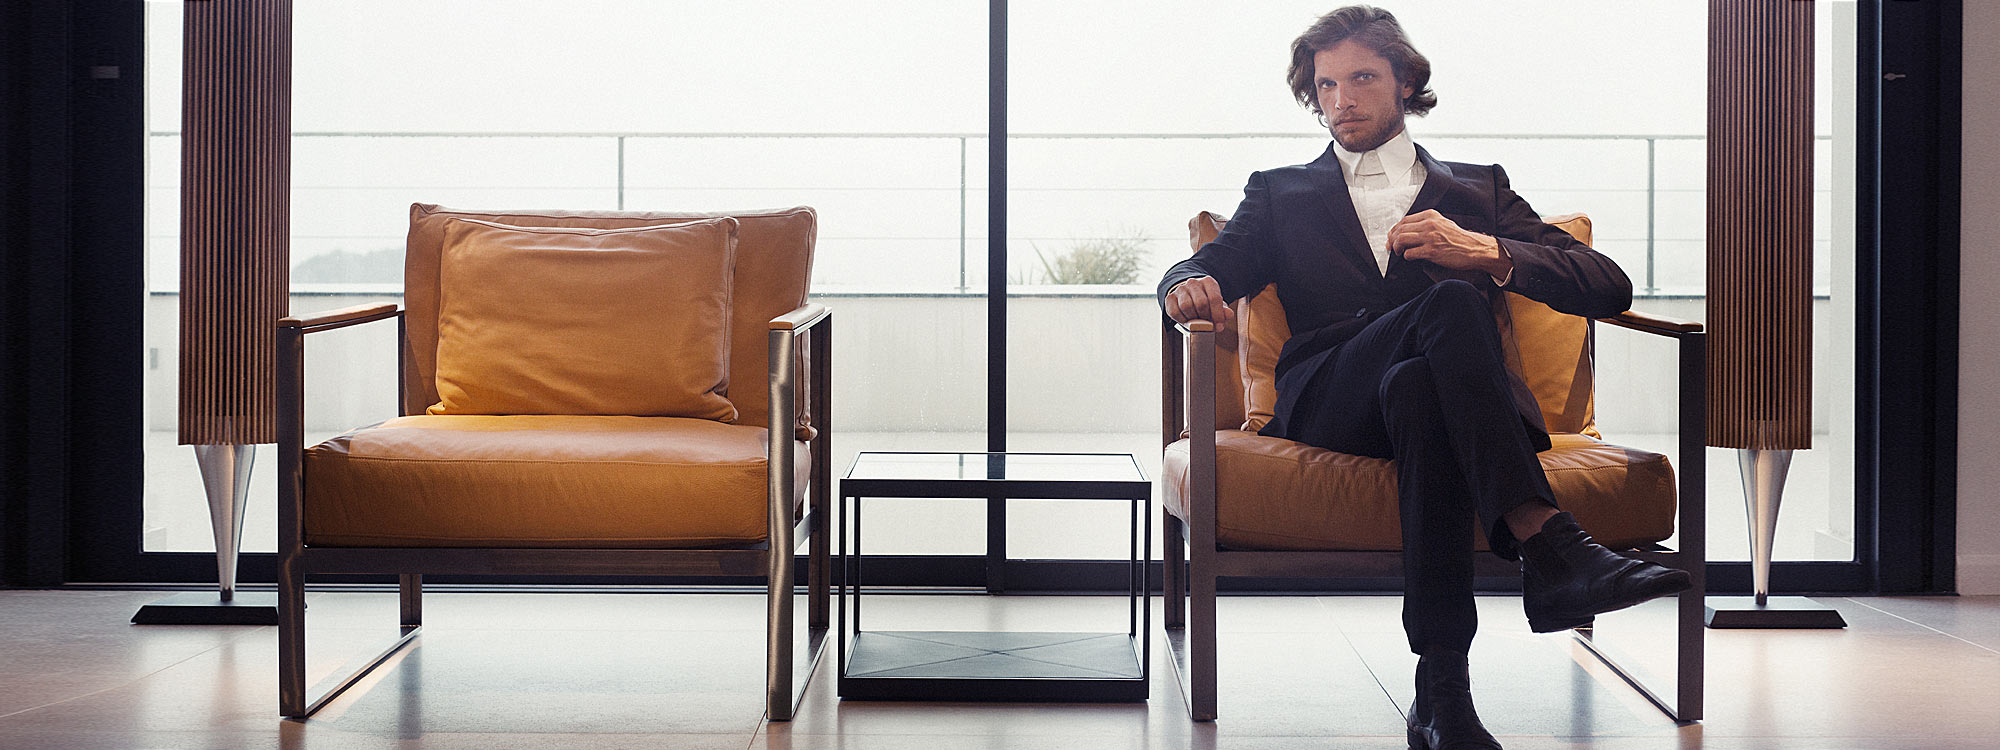 Image of Swedish hipster dressed in a suit, sat in Roshults Monaco lounge chair in Raw stainless steel with Beige leather cushions, by Roshults Sweden